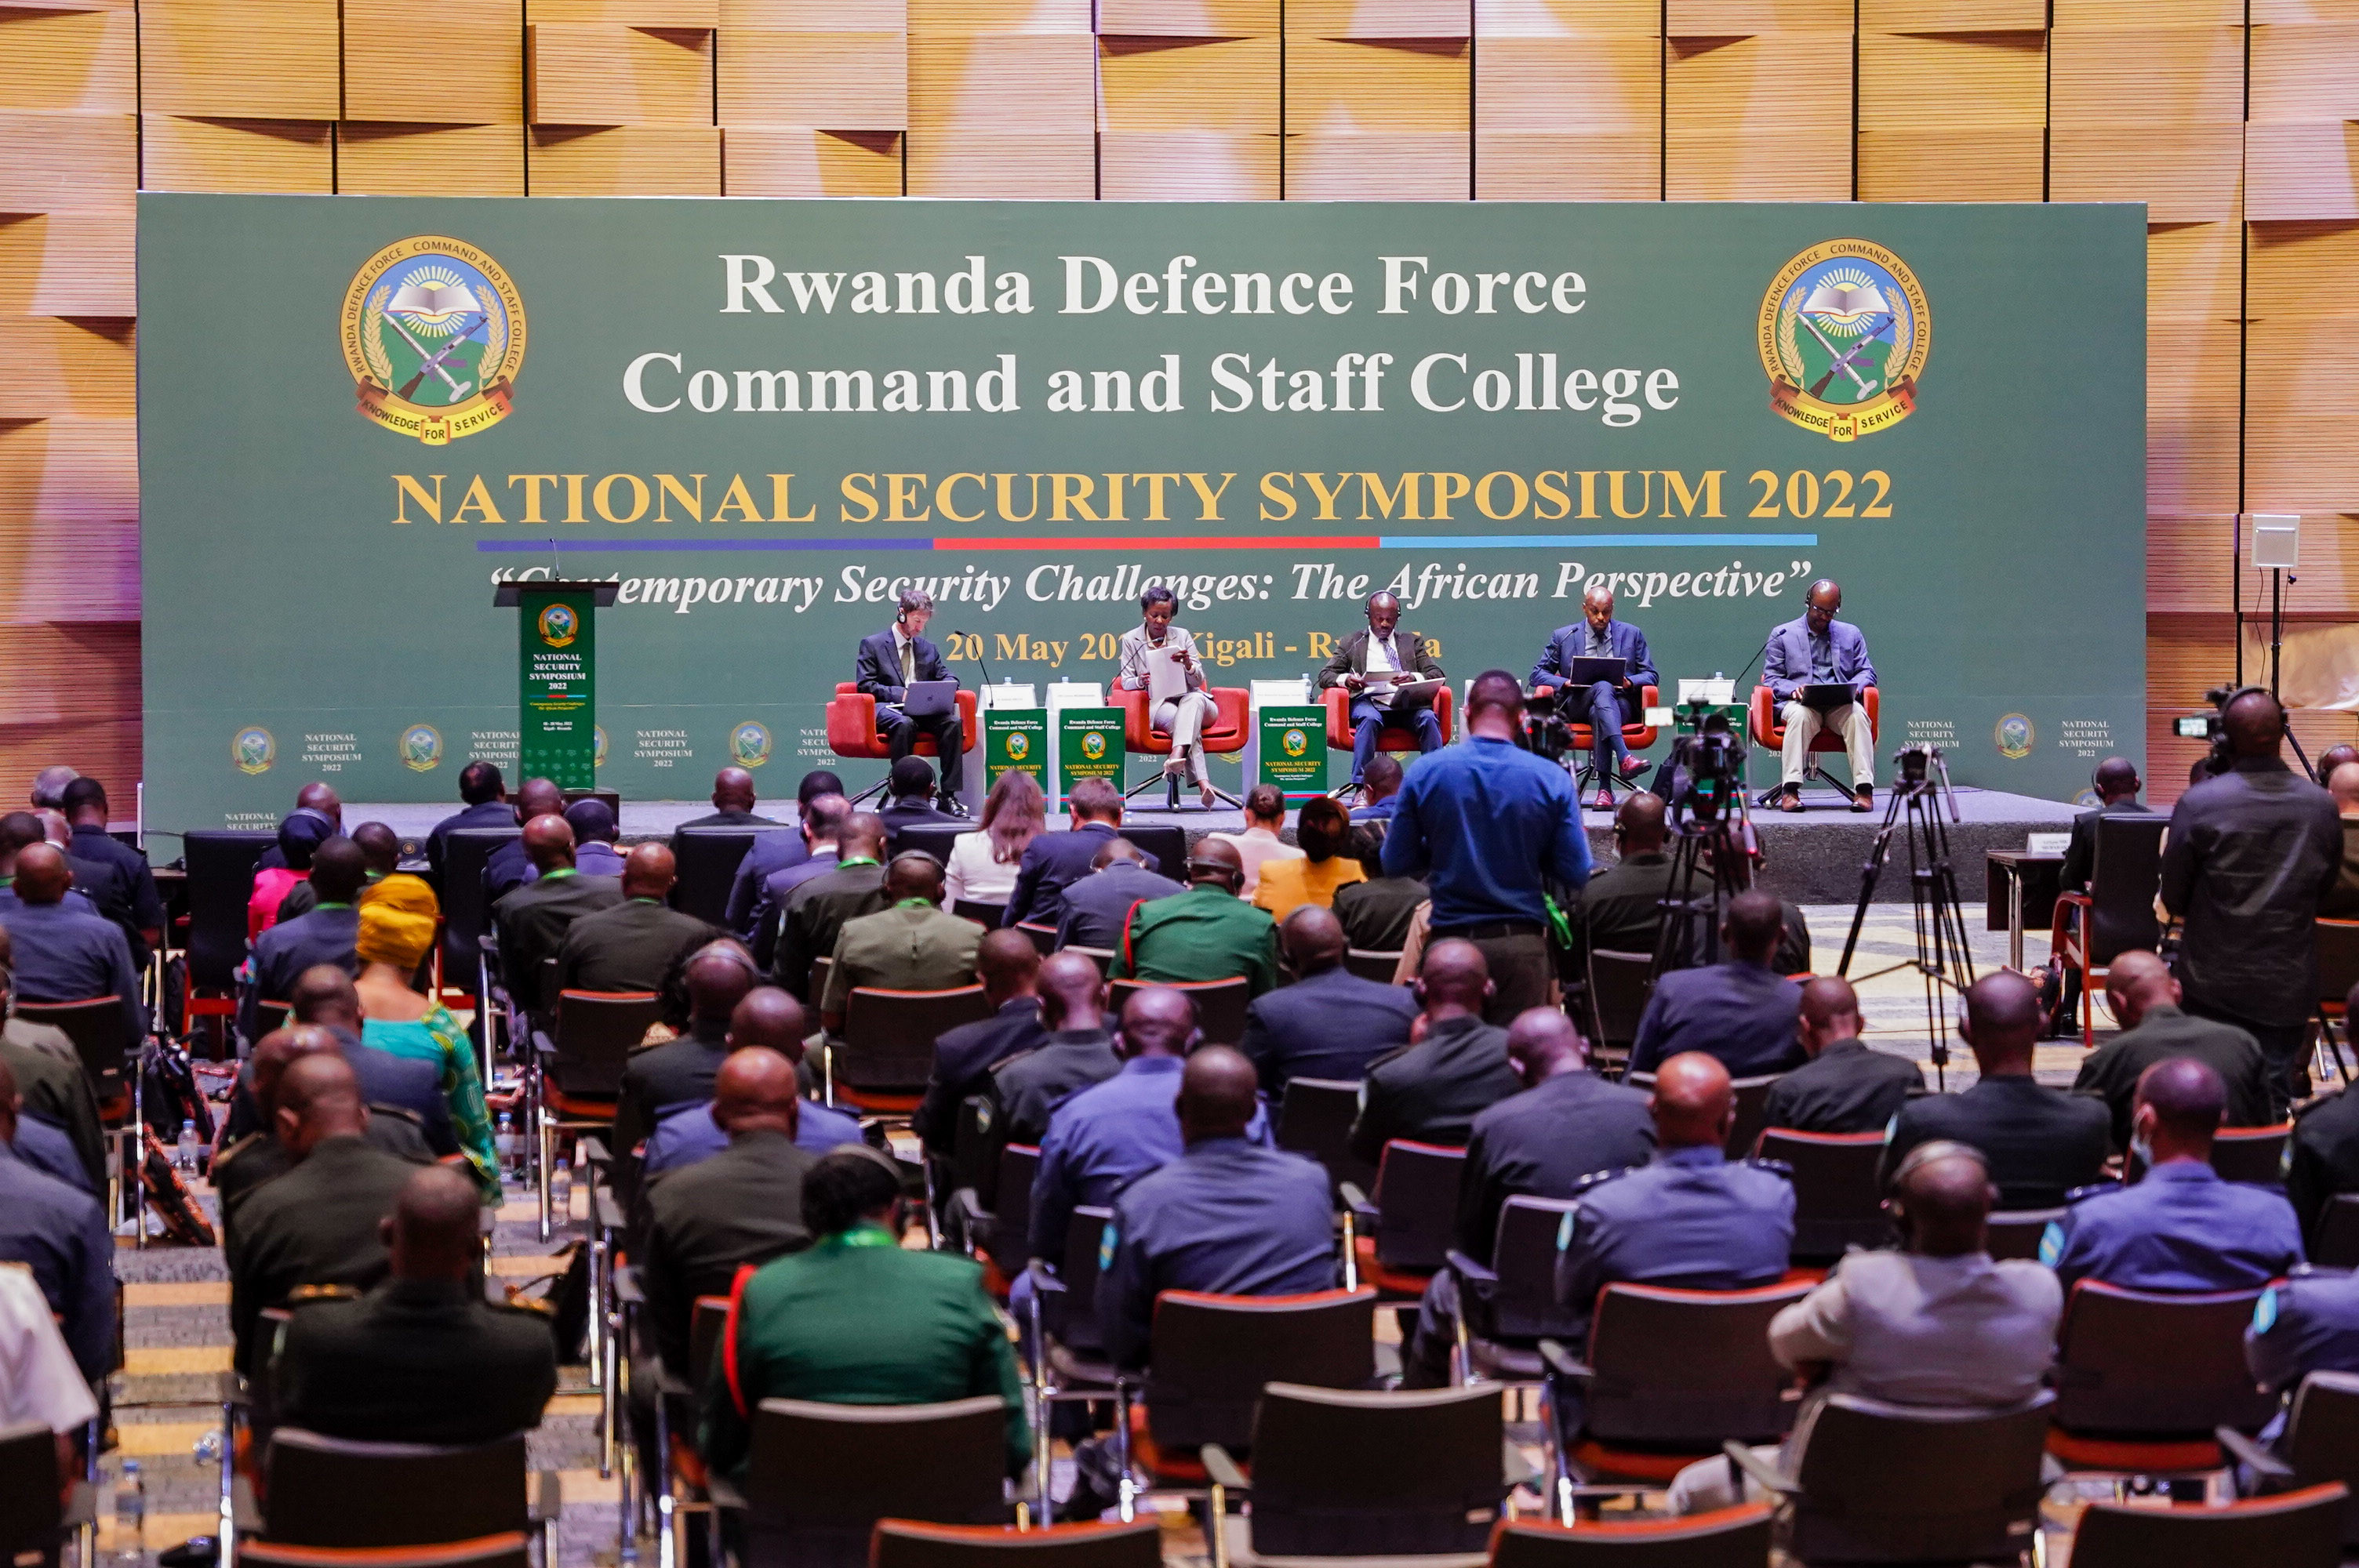 Delegates follow a panel discussion during the 9th National Security Symposium  in Kigali on May 18.The symposium was organized by Rwanda Defence Force in collaboration with the University of Rwanda, the symposium brings together academicians, government officials and subject matter experts. Photo by Dan Nsengiyumva